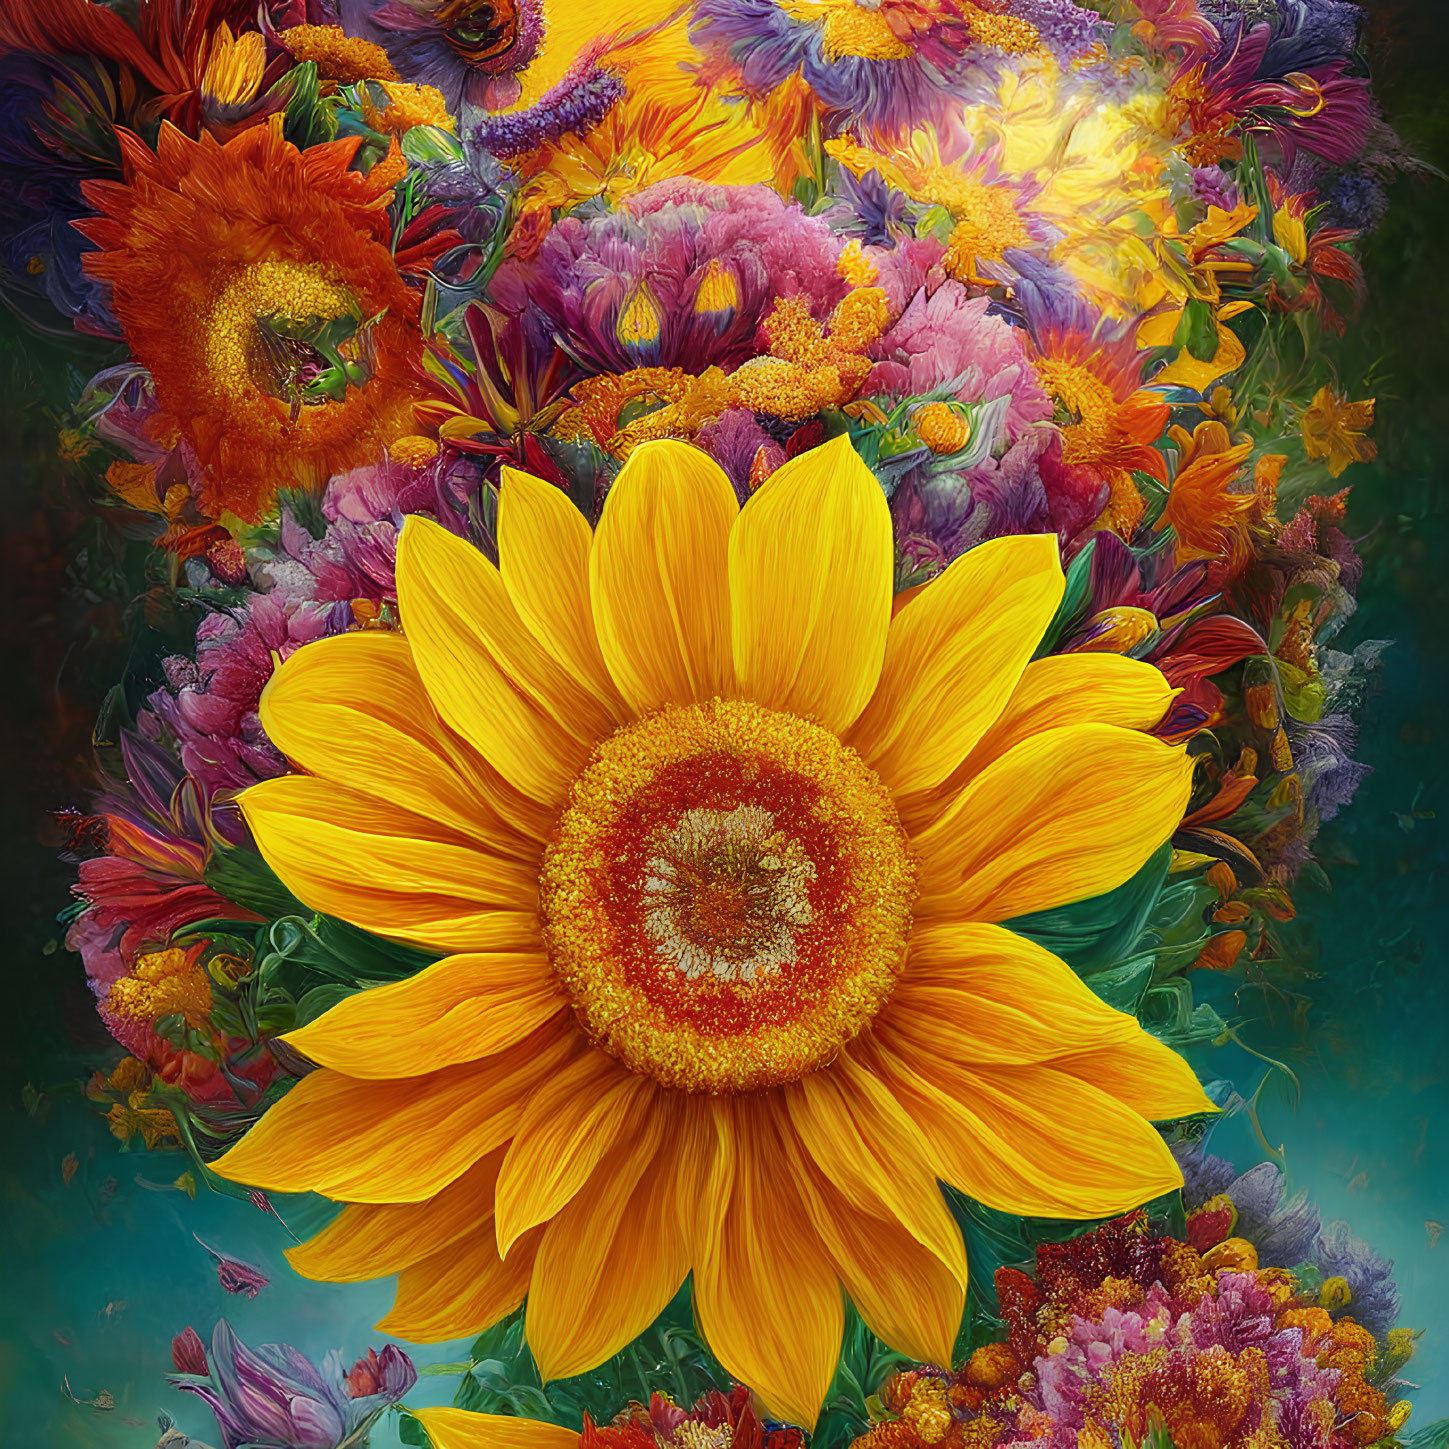 Colorful Flower Painting Featuring Large Sunflower